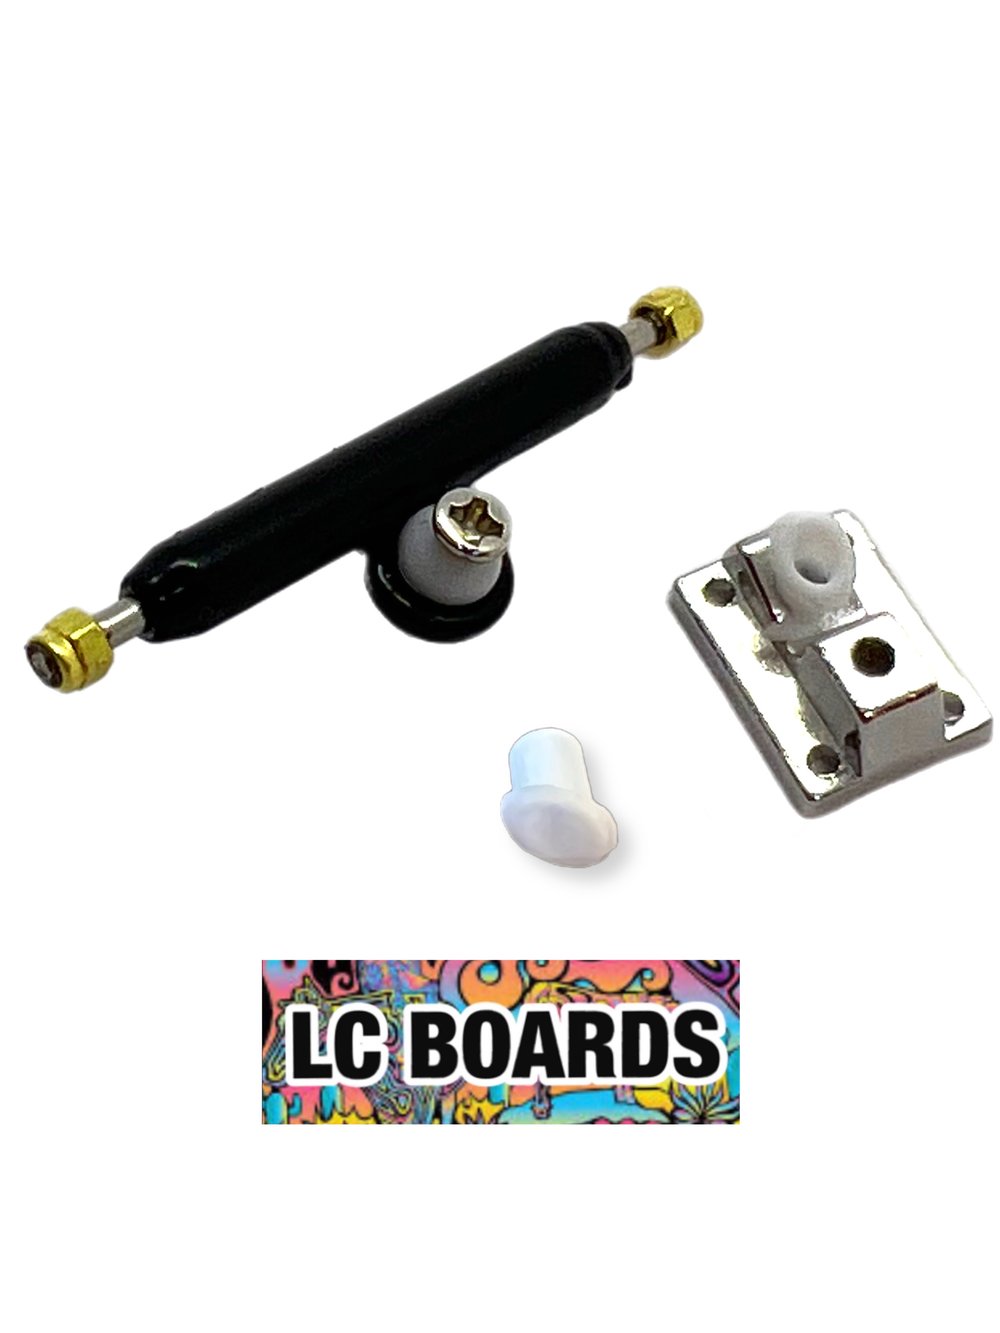 LC BOARDS FINGERBOARDS PIVOT CUPS TRUCK UPGRADE